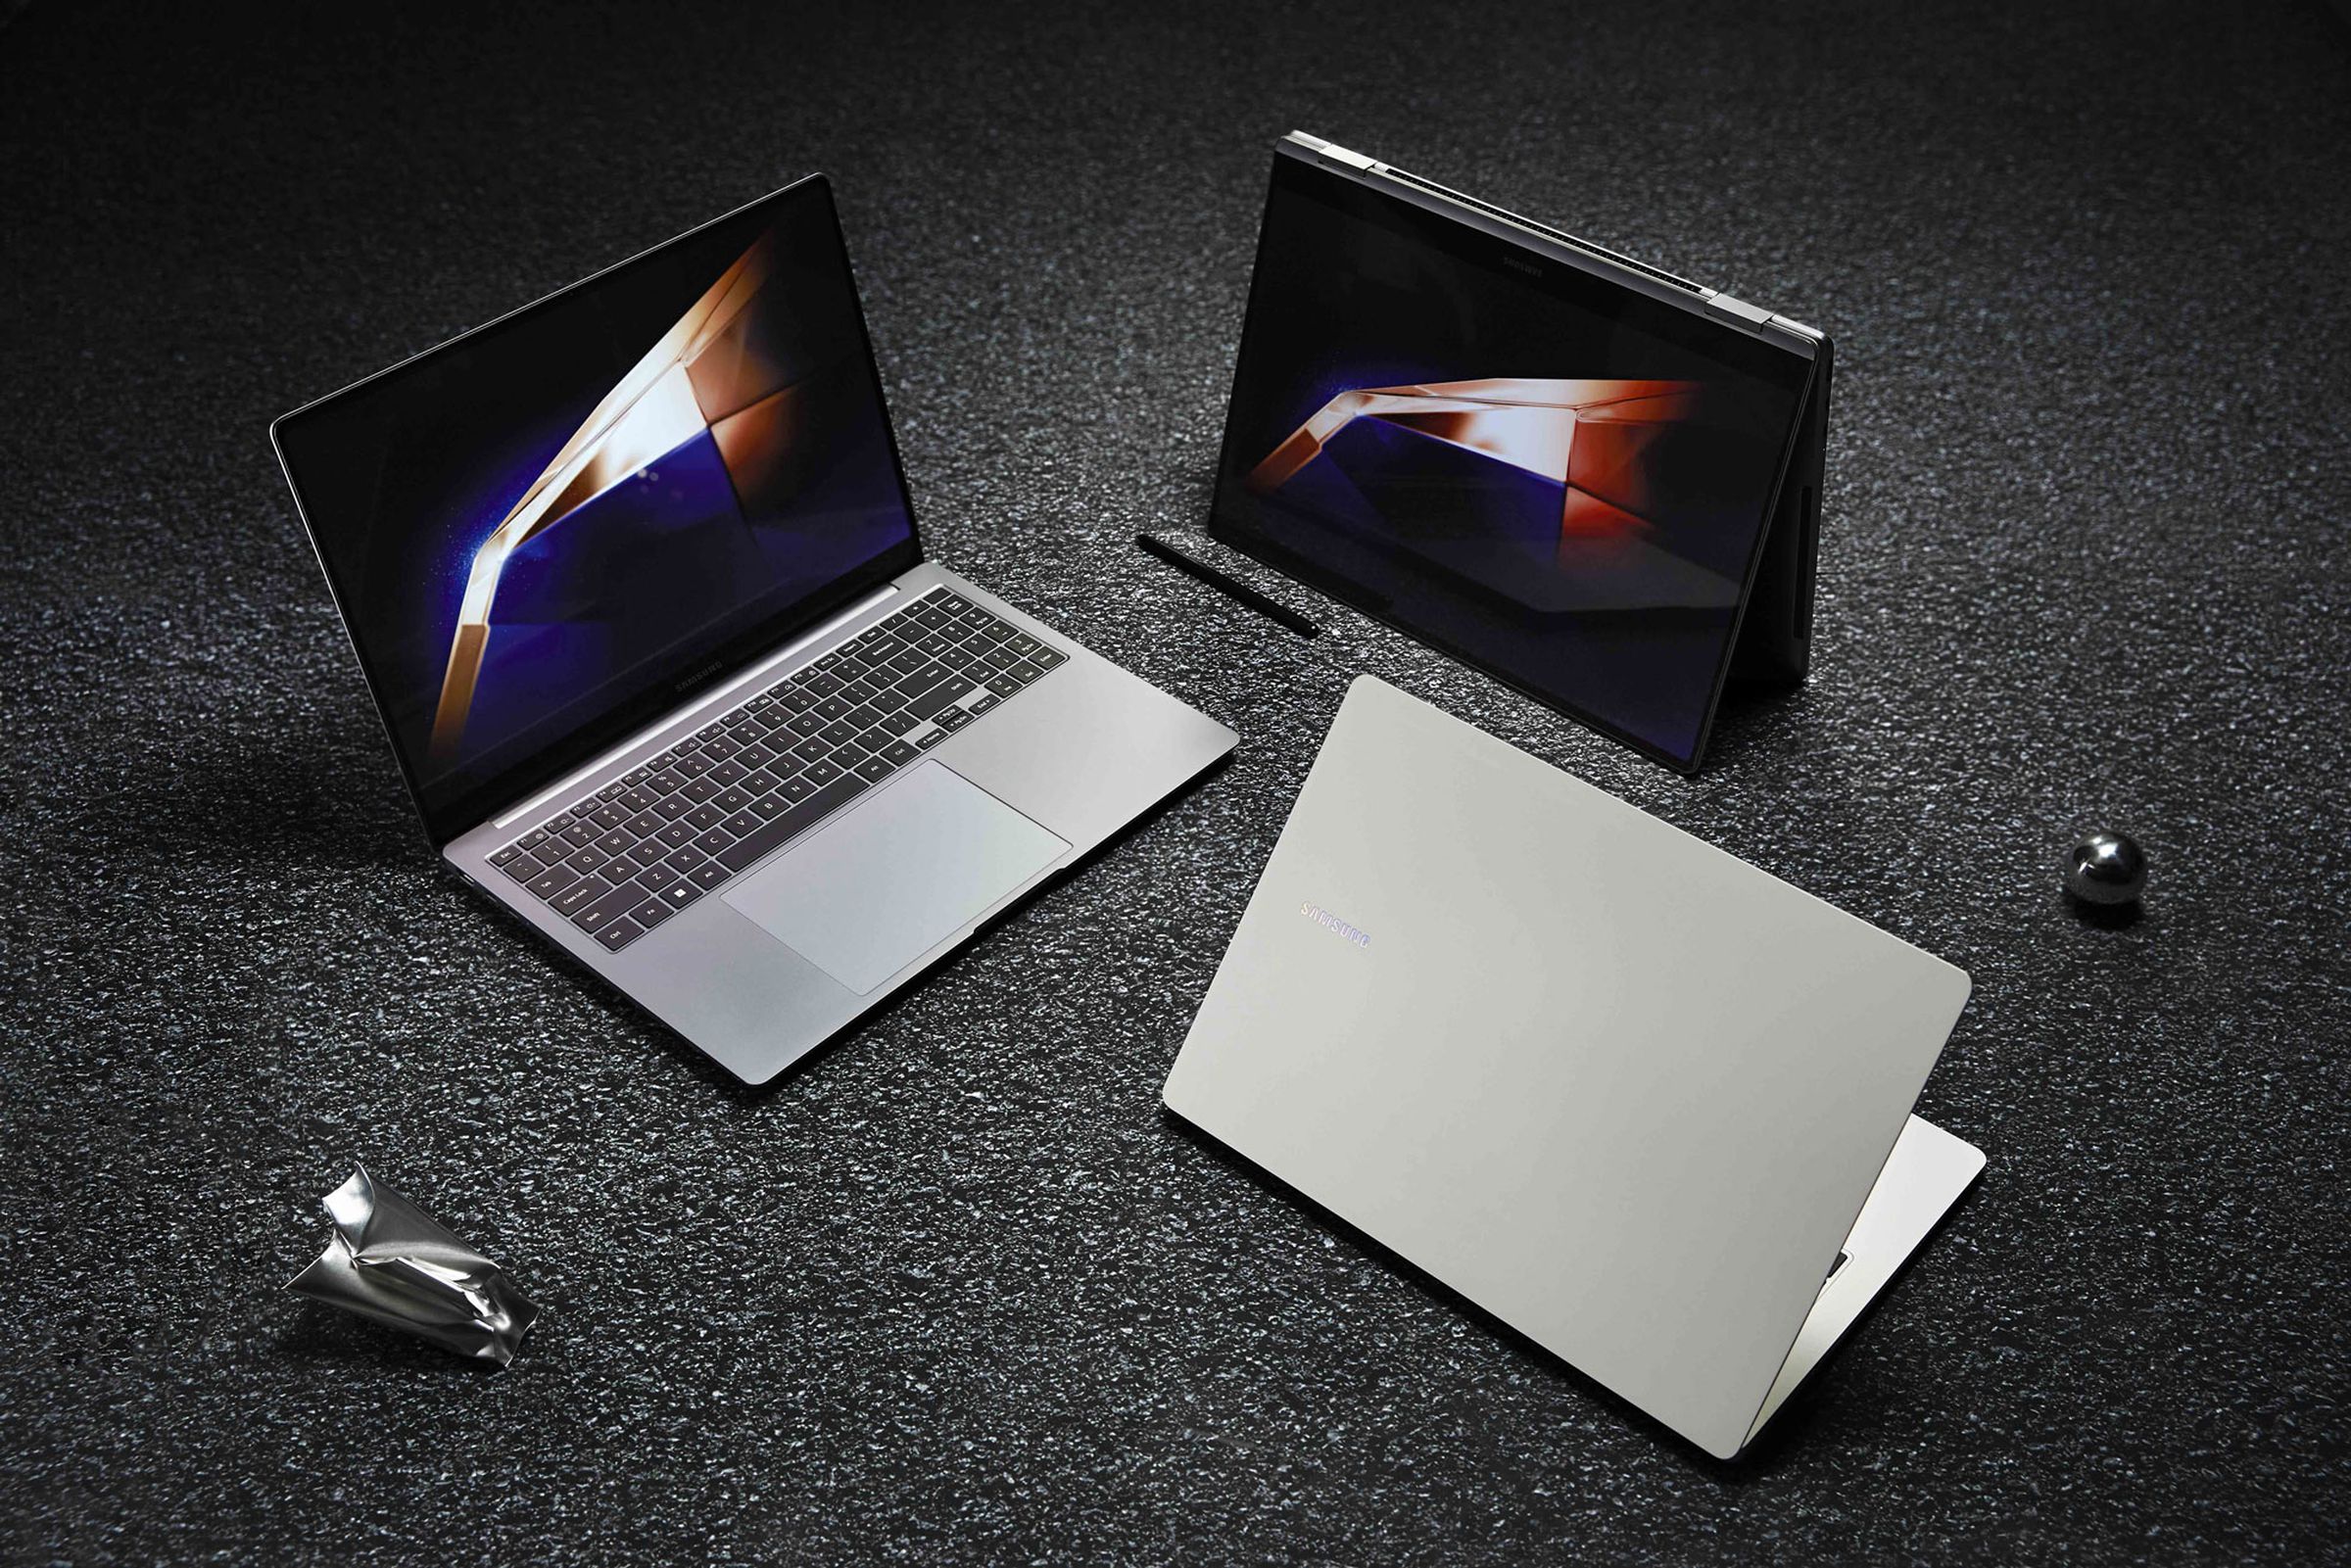 A group of three silver laptops arranged in a circle against a dark gray background.